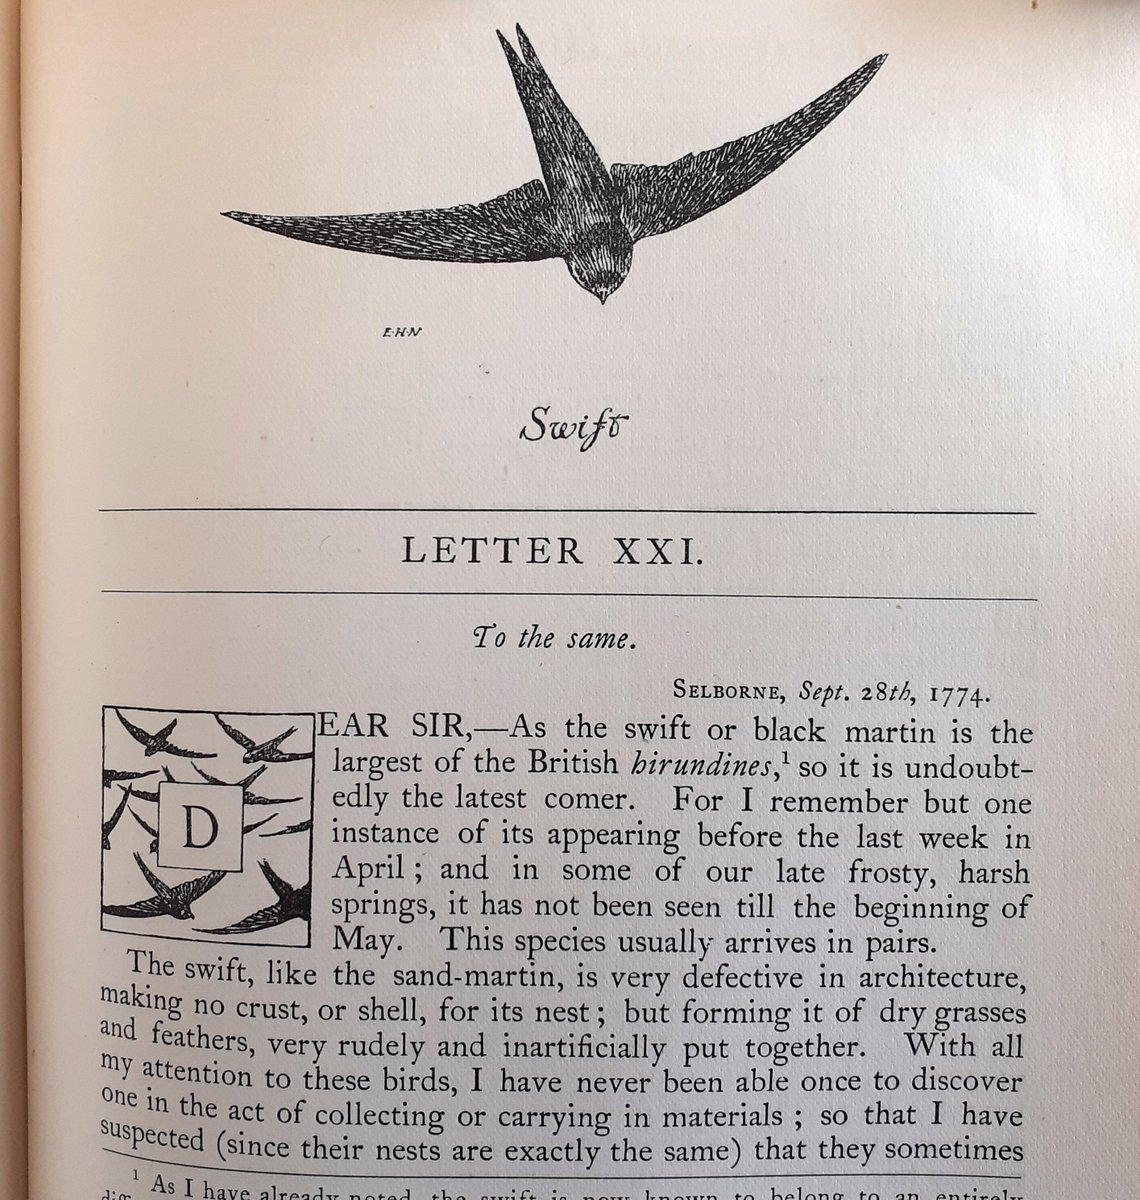 Still time to book for on-site talk at HRO about swifts
Hear about their preservation, descriptions by past writers & archive records of our environment
Tues 30 Apr 6pm. £7.50, booking req'd: bit.ly/4cDoEjo 

#hampshirearchives #Hampshirebirds #Hampshirenature #EYANature